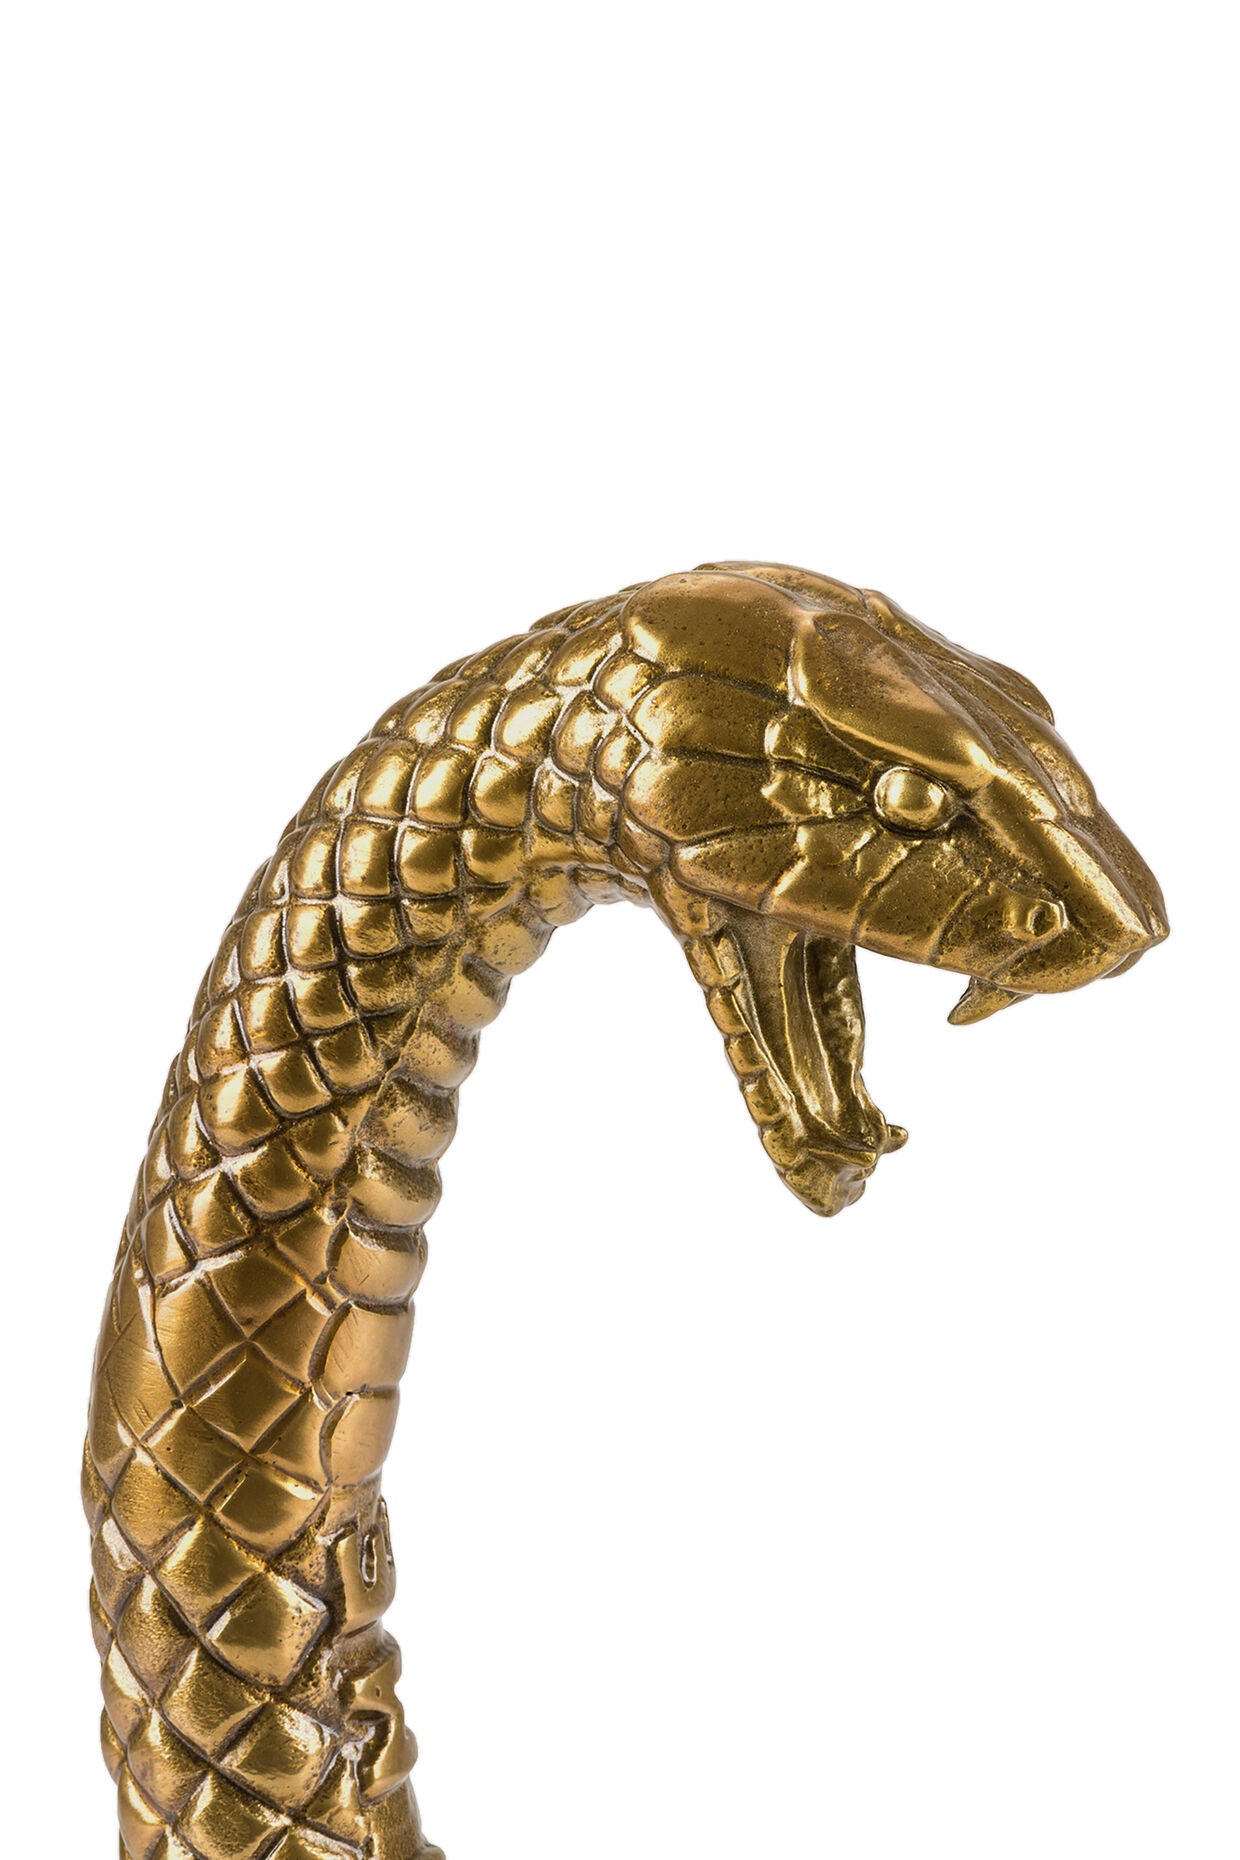 Gold snake ornament with the words "Don't Step On Me" engraved is from the Diesel Living - Wunderkammer collection by Seletti.  A decorative piece made from aluminium. 